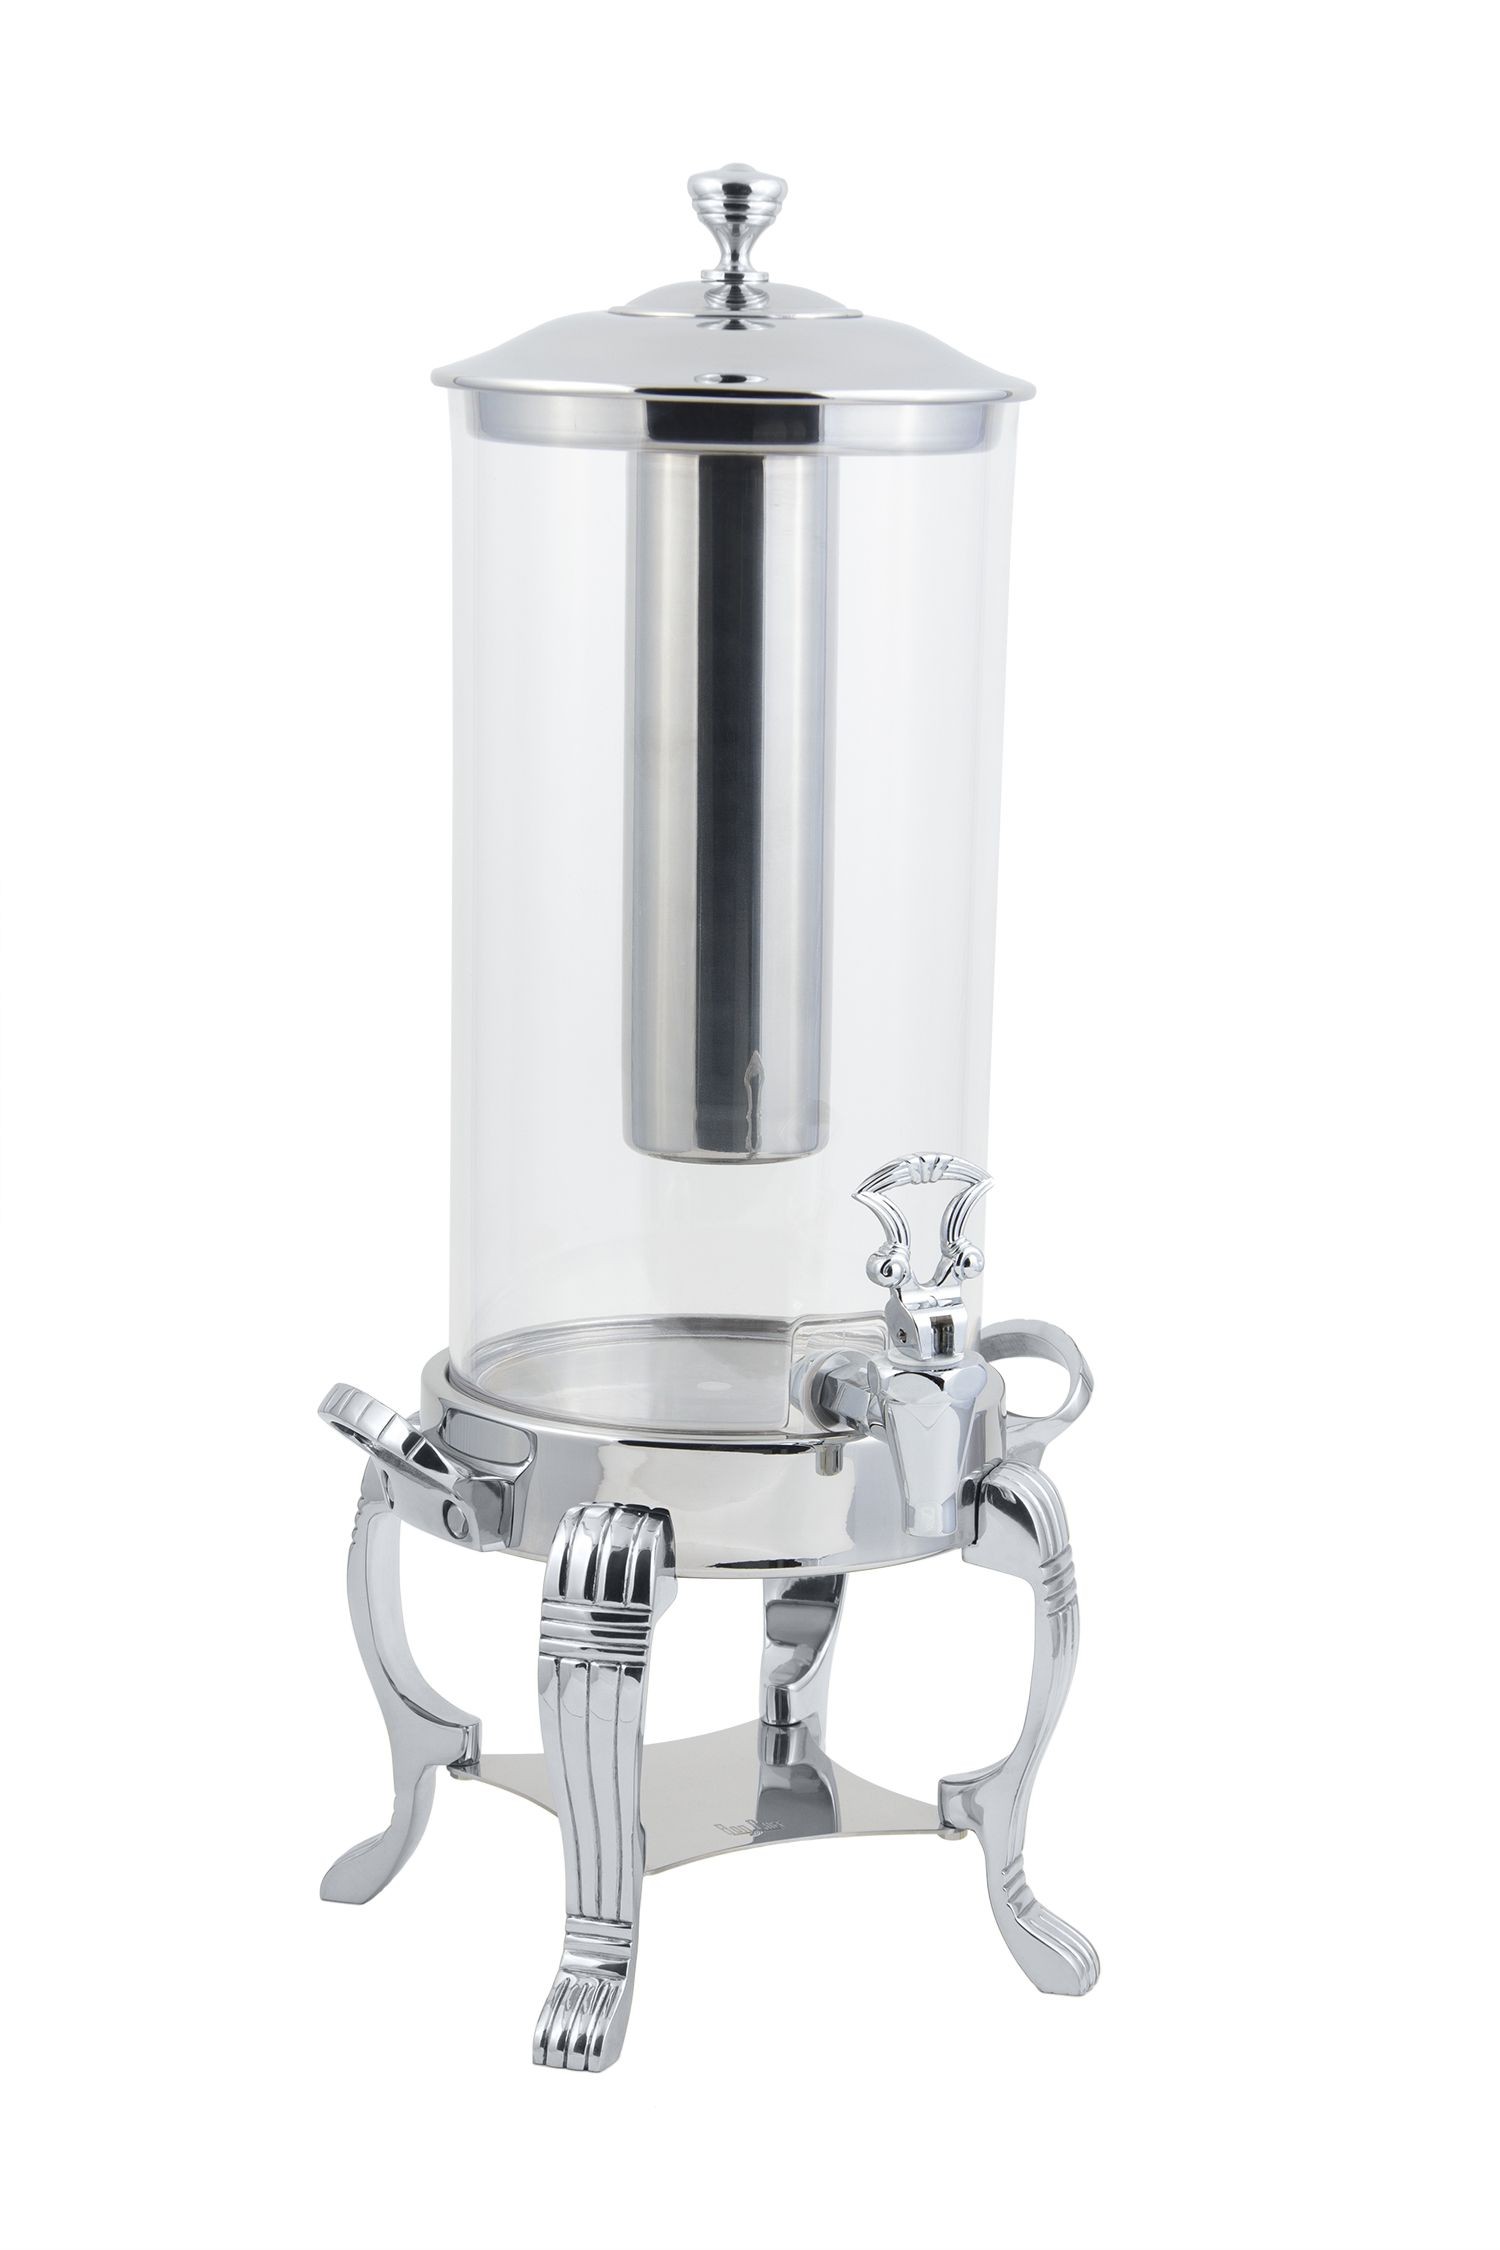 Bon Chef 40500CH Aurora Juice Dispenser with Chrome Finish. Stainless Steel Ice Chamber, 2 Gallon